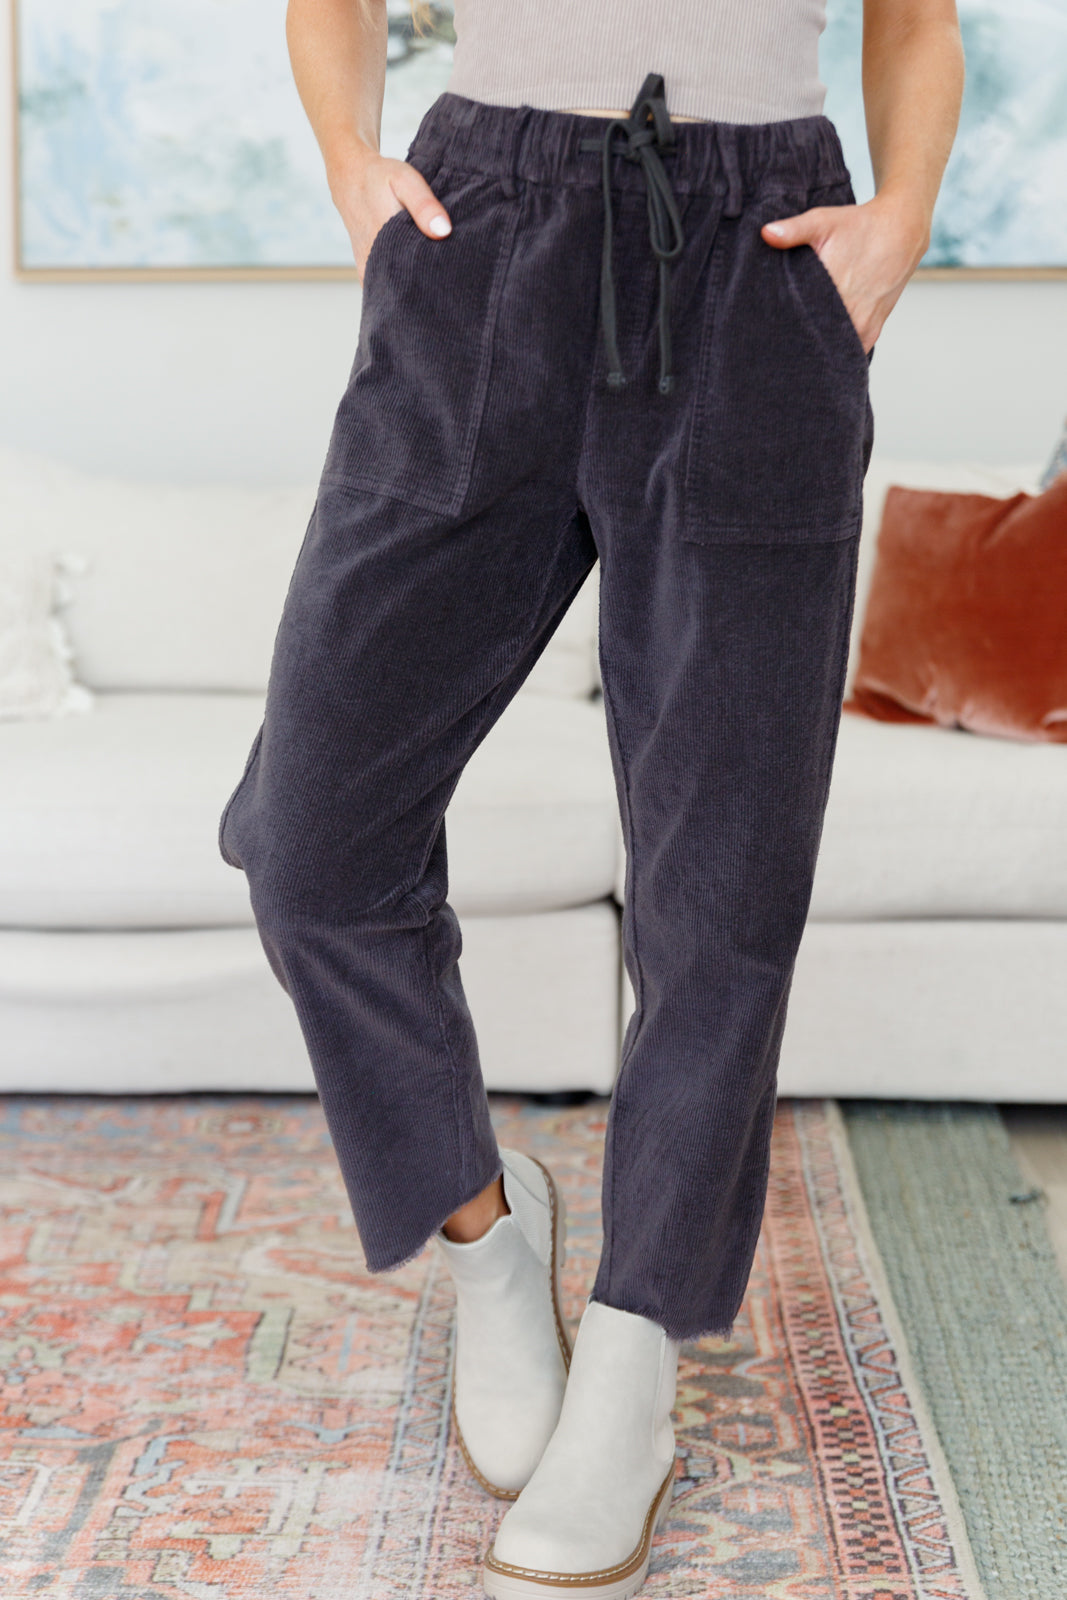 Less Confused Corduroy Pants - Three Bears Boutique